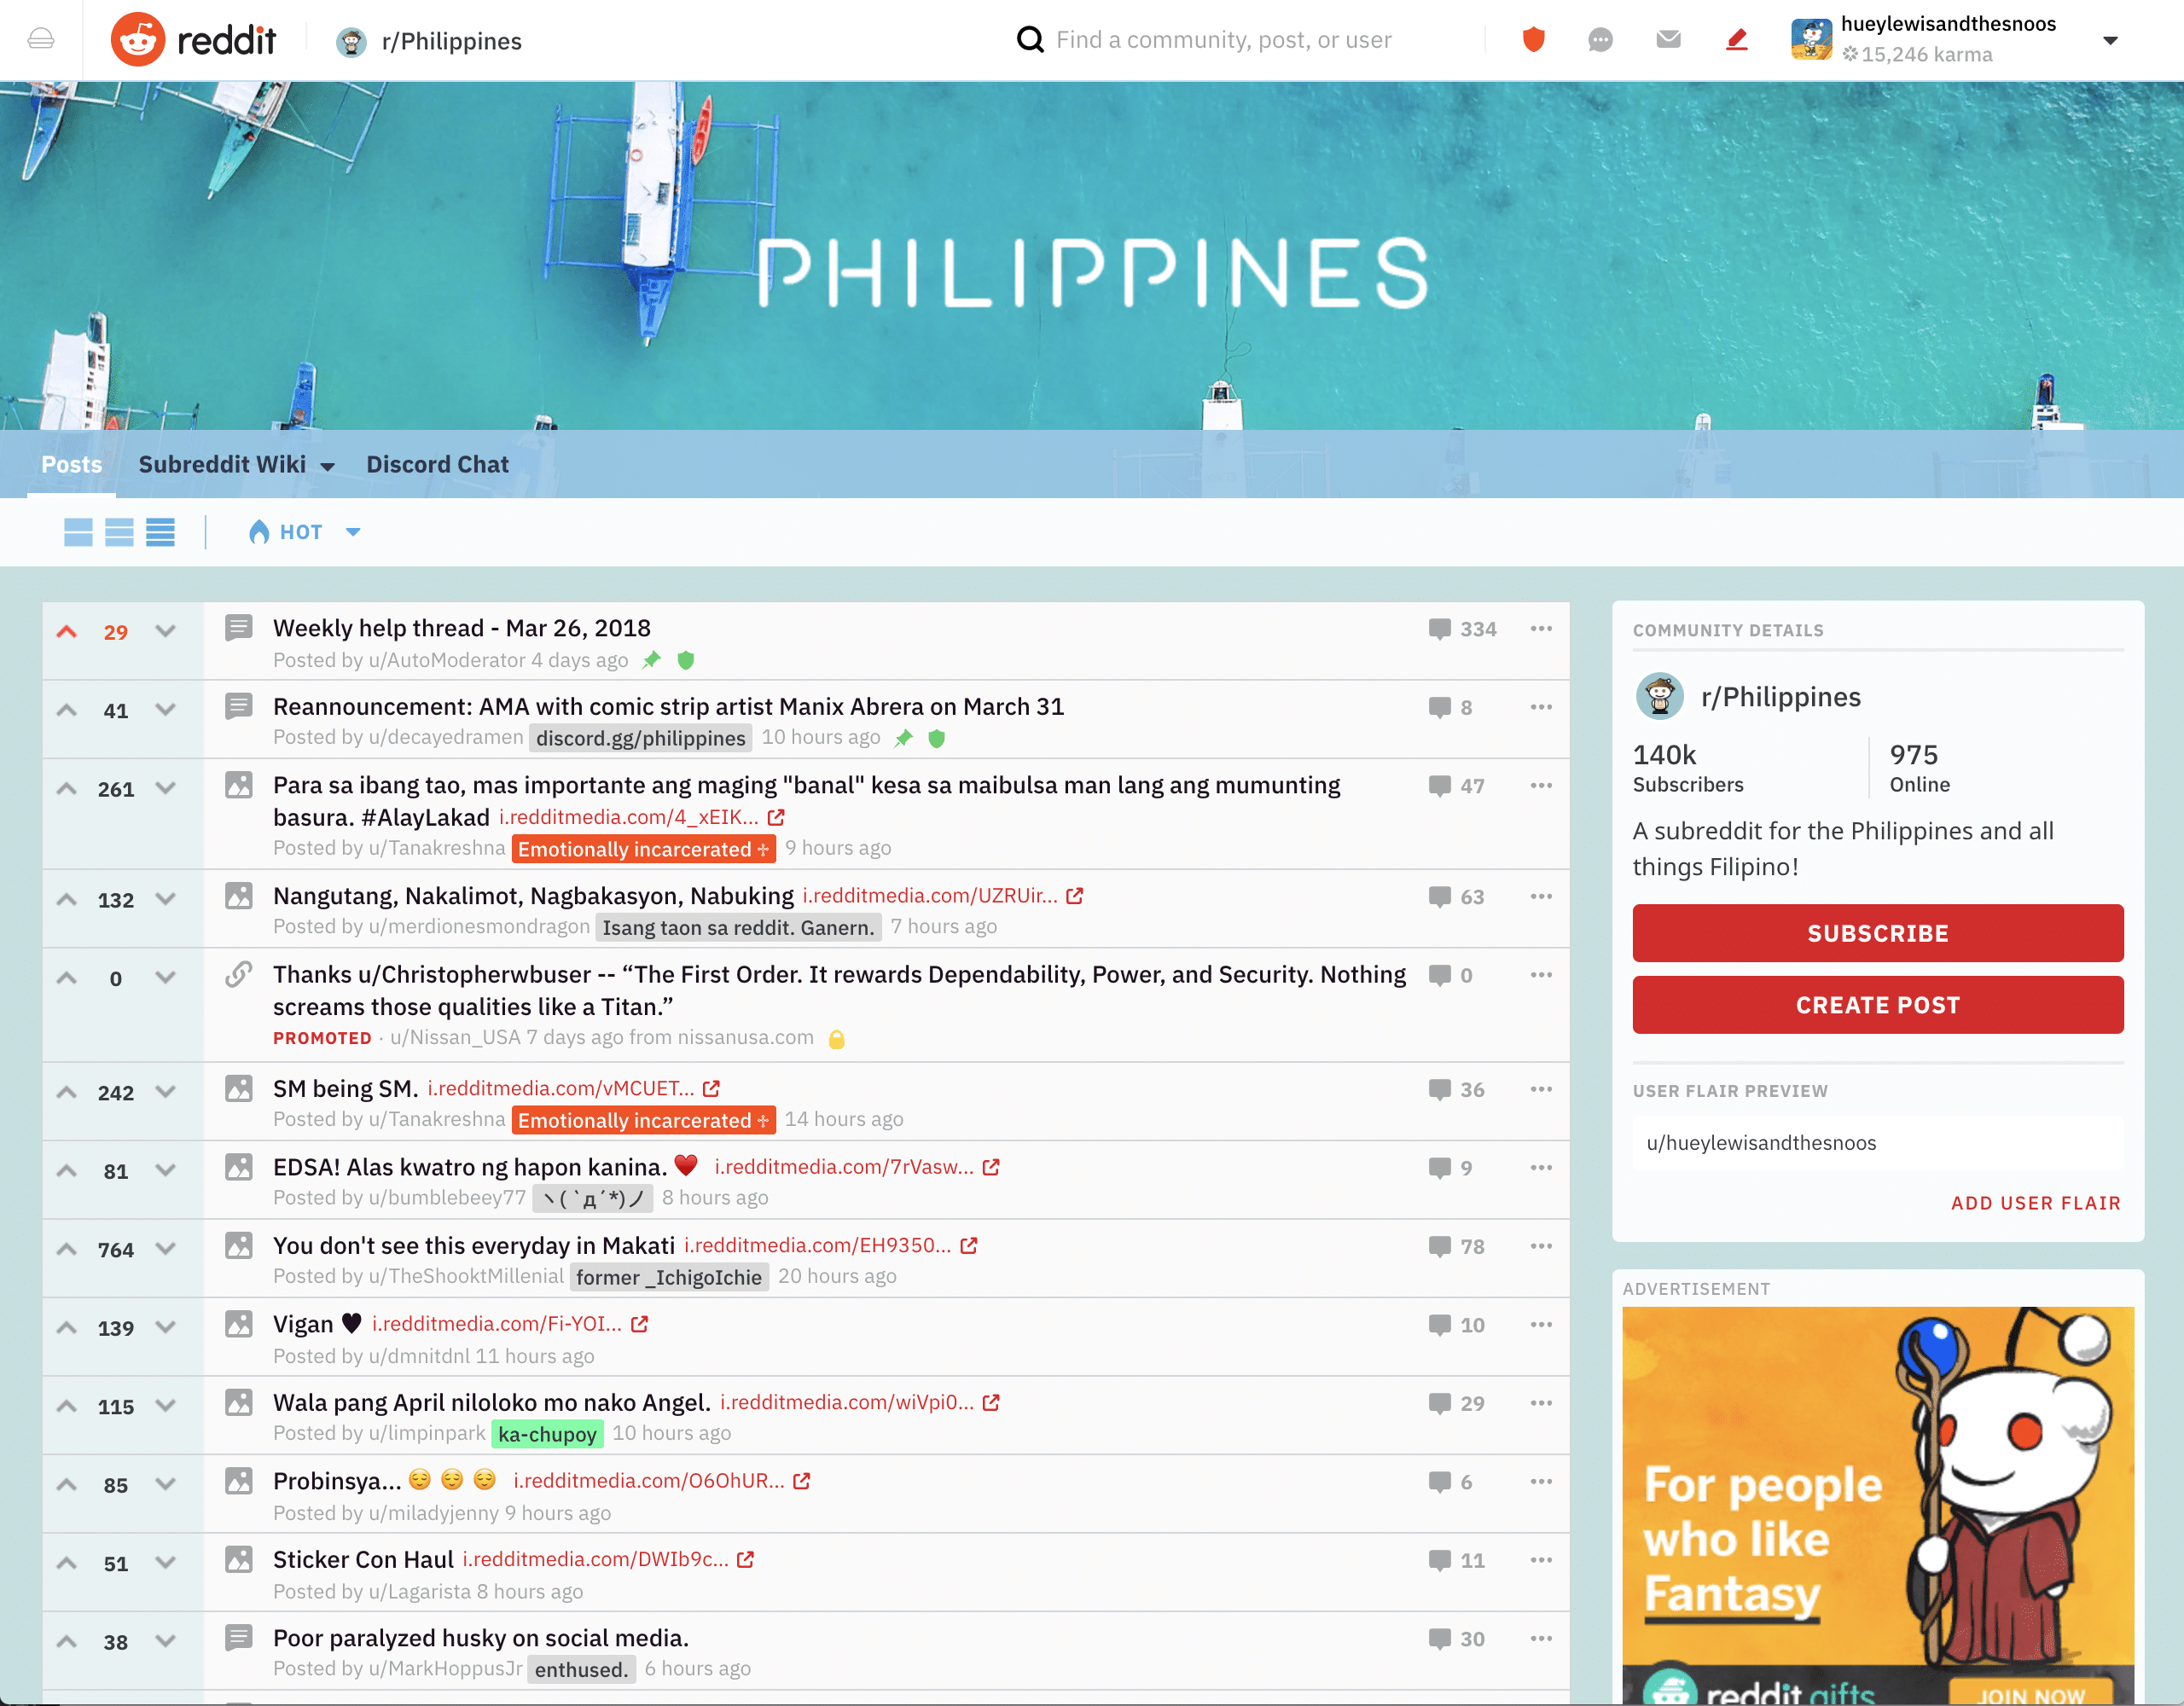  Reddit in the Compact View